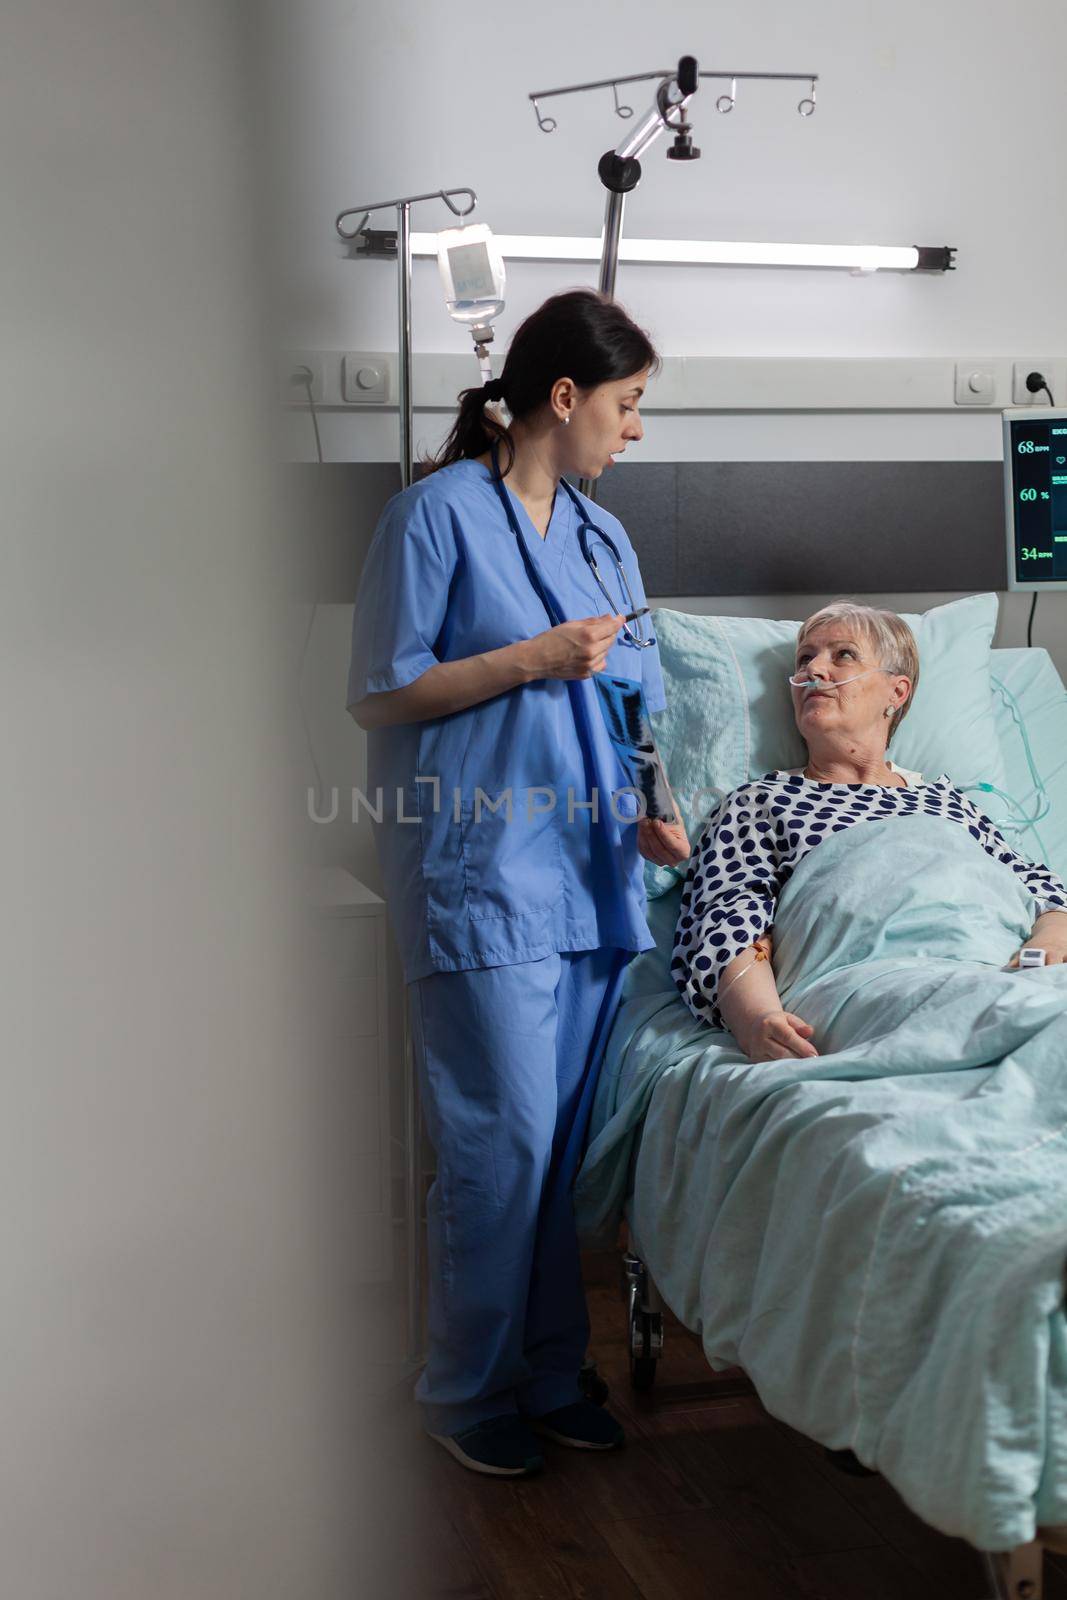 Nurse discussing with elderly patient laying in hospital bed during visit about chest x-ray. Recieving treatment through intravenous line and inhale and exhale with help from oxygen mask.